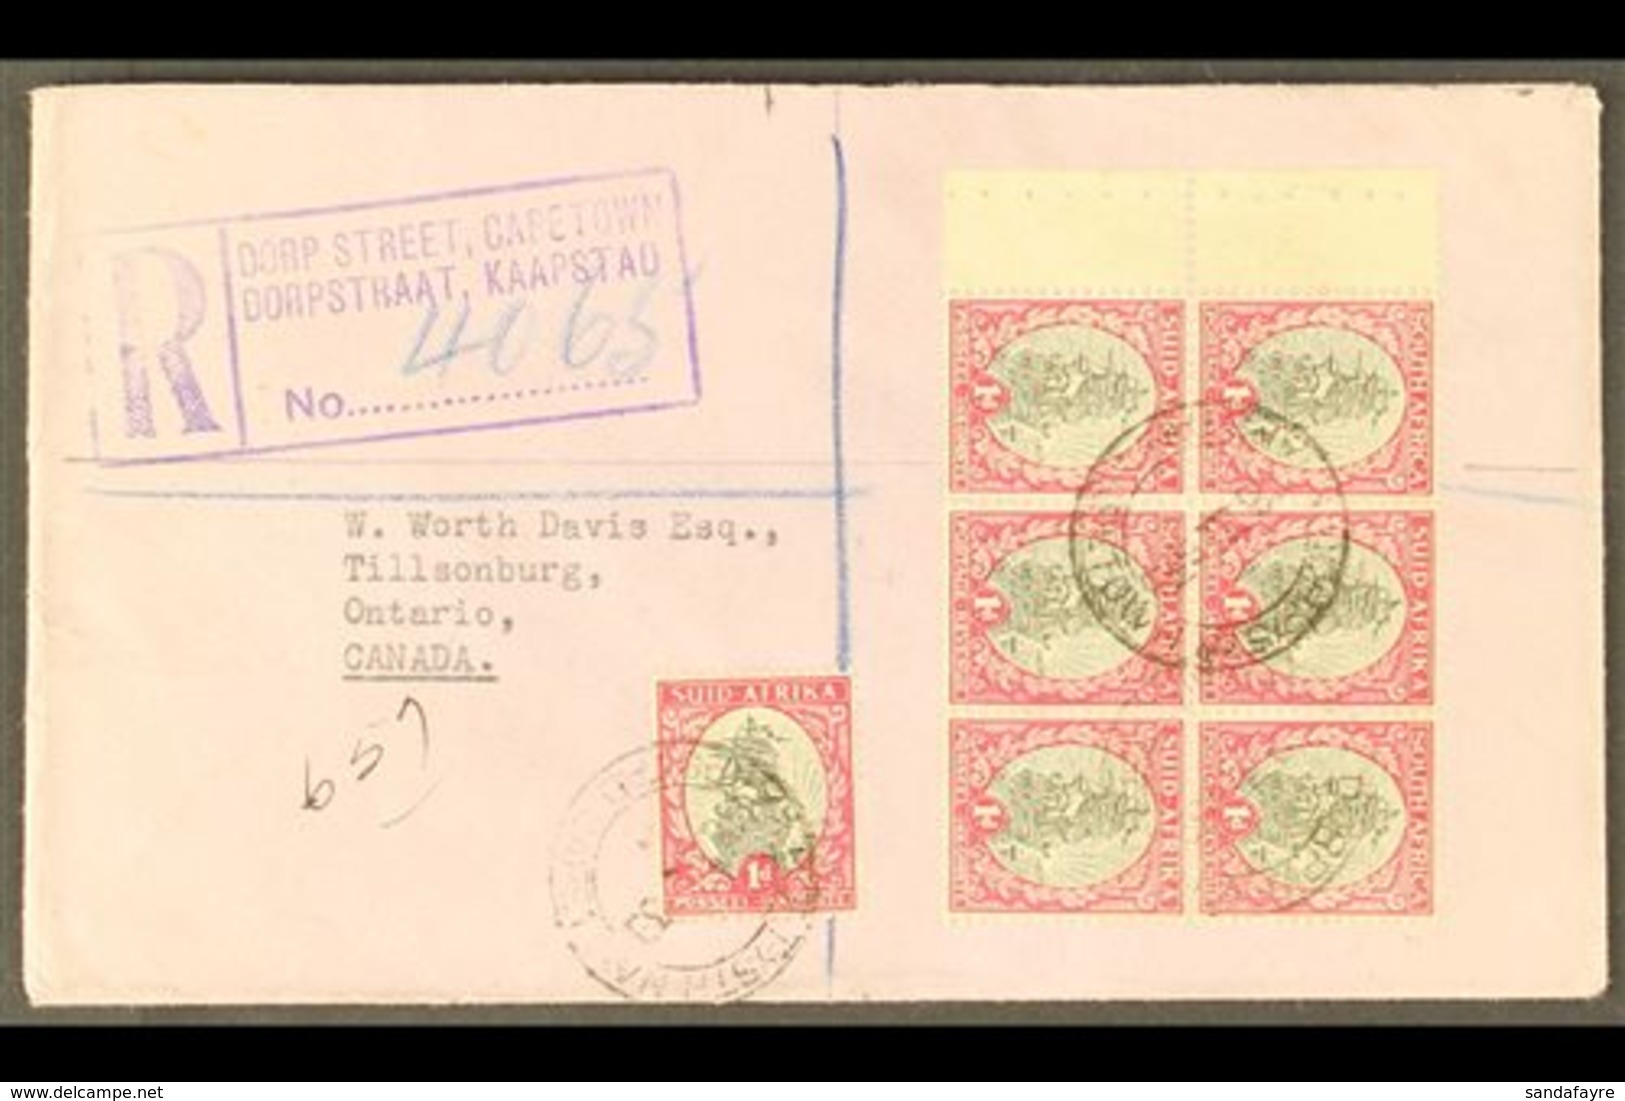 1939  Reg'd Cover To Canada, Franked With 1d BOOKLET PANE Of 6 Plus 1d Single, SG 56, Ex Booklet SG SB13 Or SB14, Neat,  - Unclassified